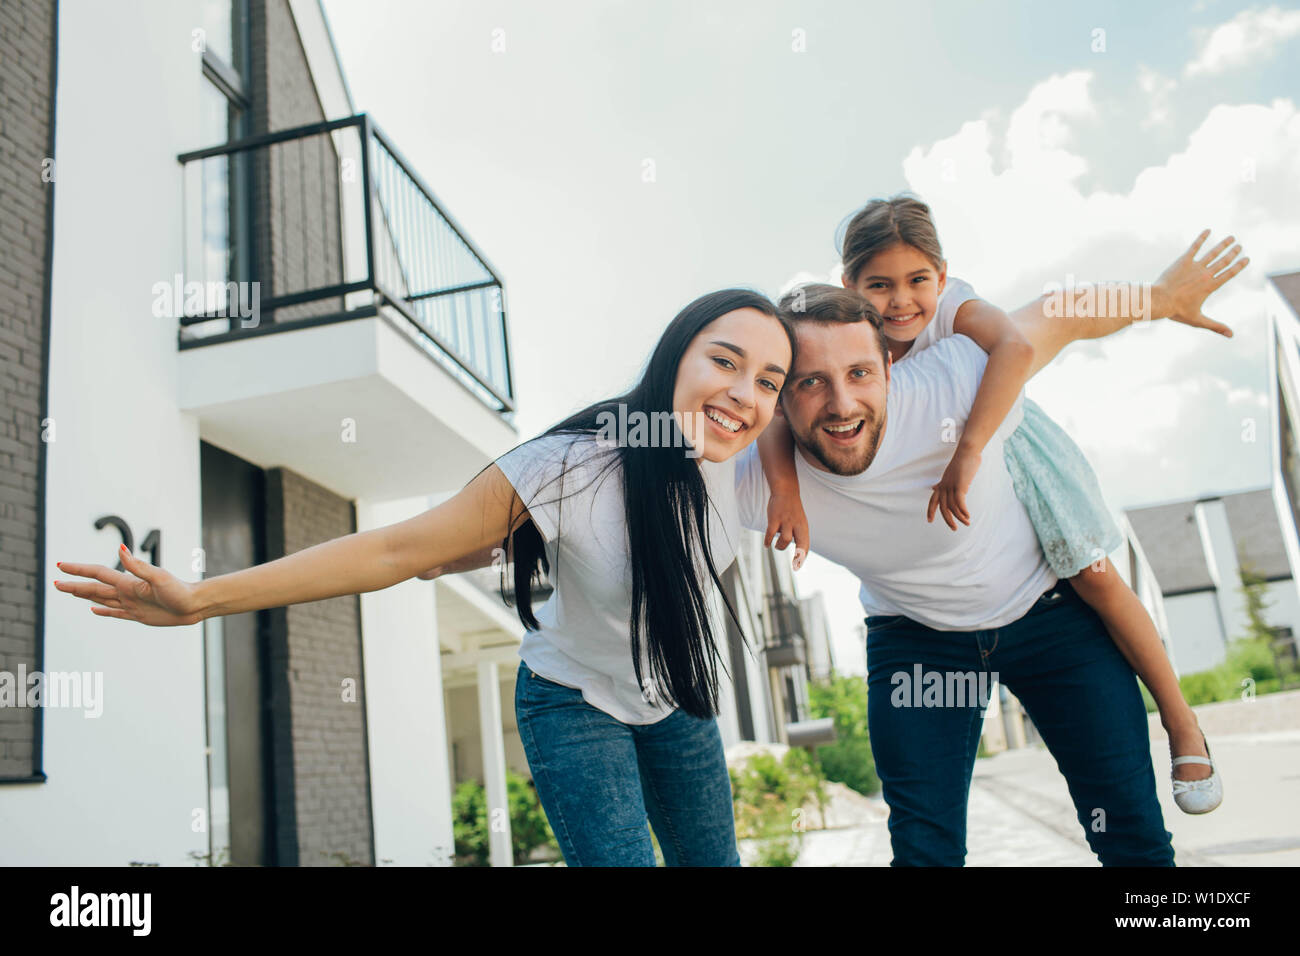 family playing with daughter, child piggyback ride on father's back, they raised hands like flying Stock Photo